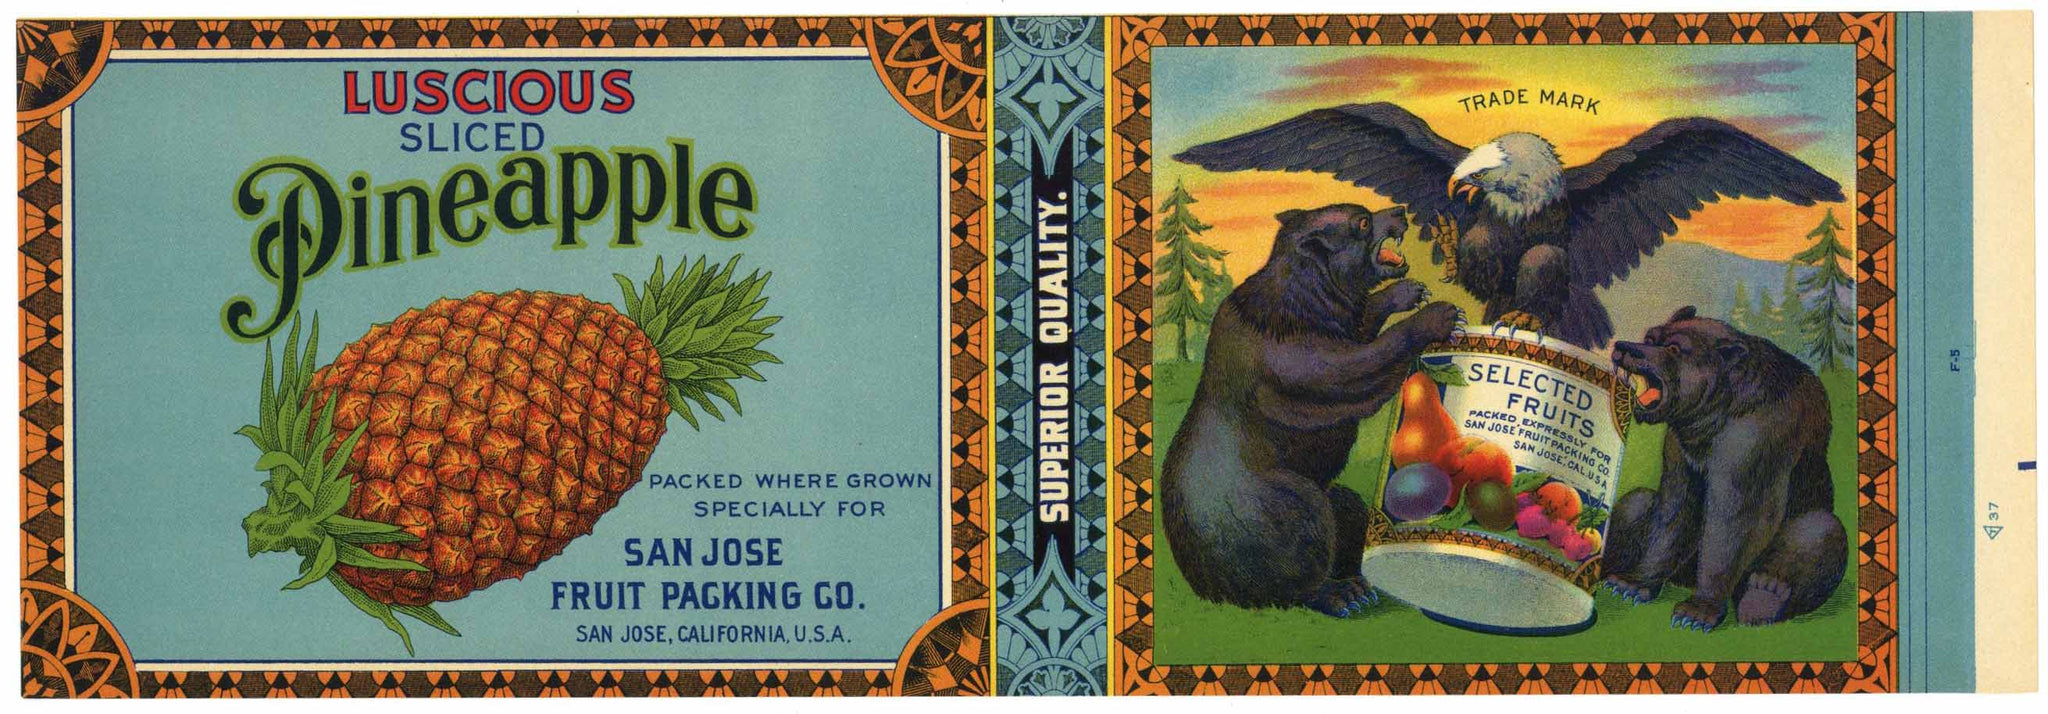 Luscious Sliced Pineapple Brand Vintage San Jose Packing Co. Can Label